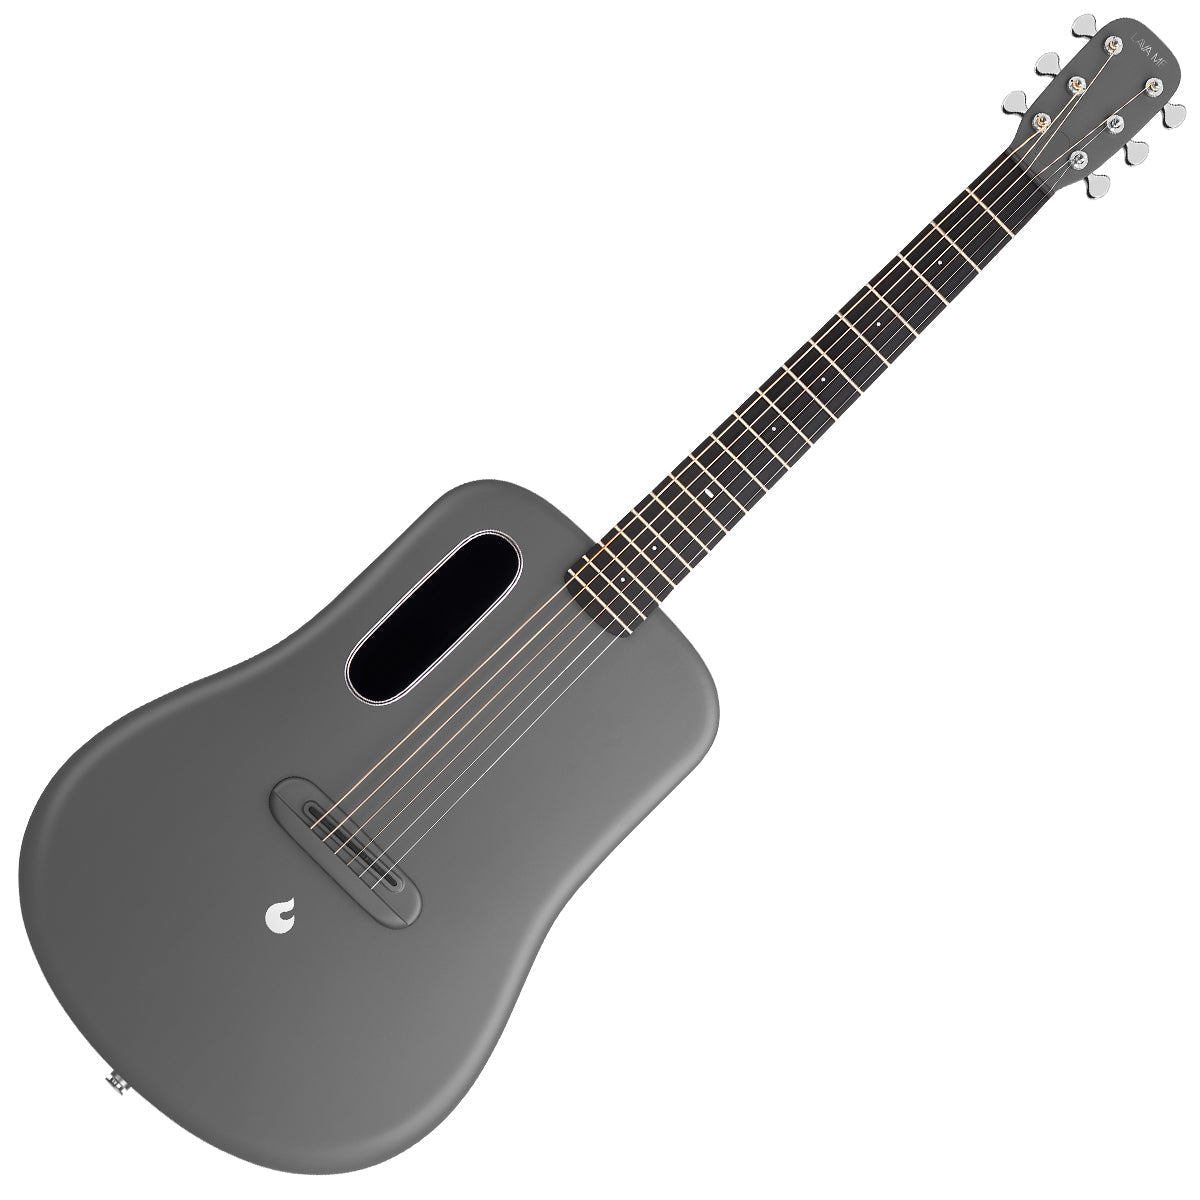 LAVA ME4 Carbon 36" with Space Bag ~ Space Grey, Acoustic Guitar for sale at Richards Guitars.